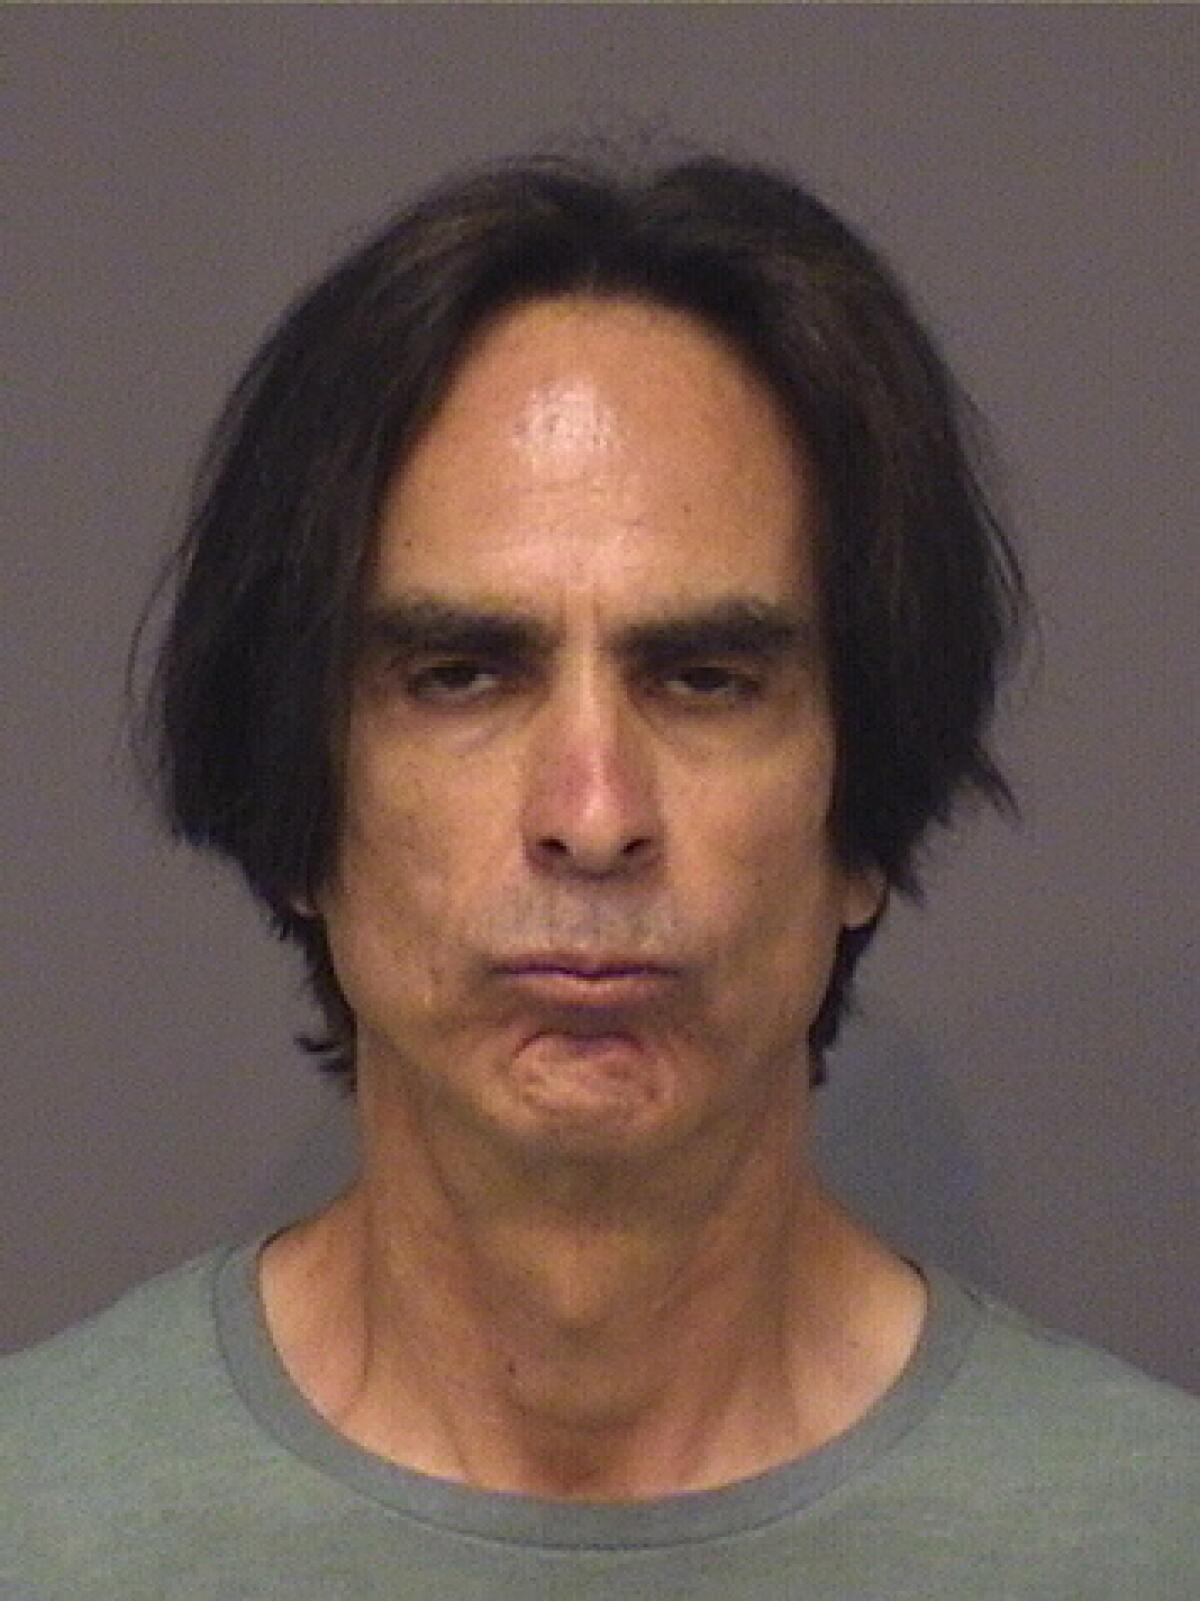 Charles Jacques was arrested at his home in Huntington Beach on Thursday morning.